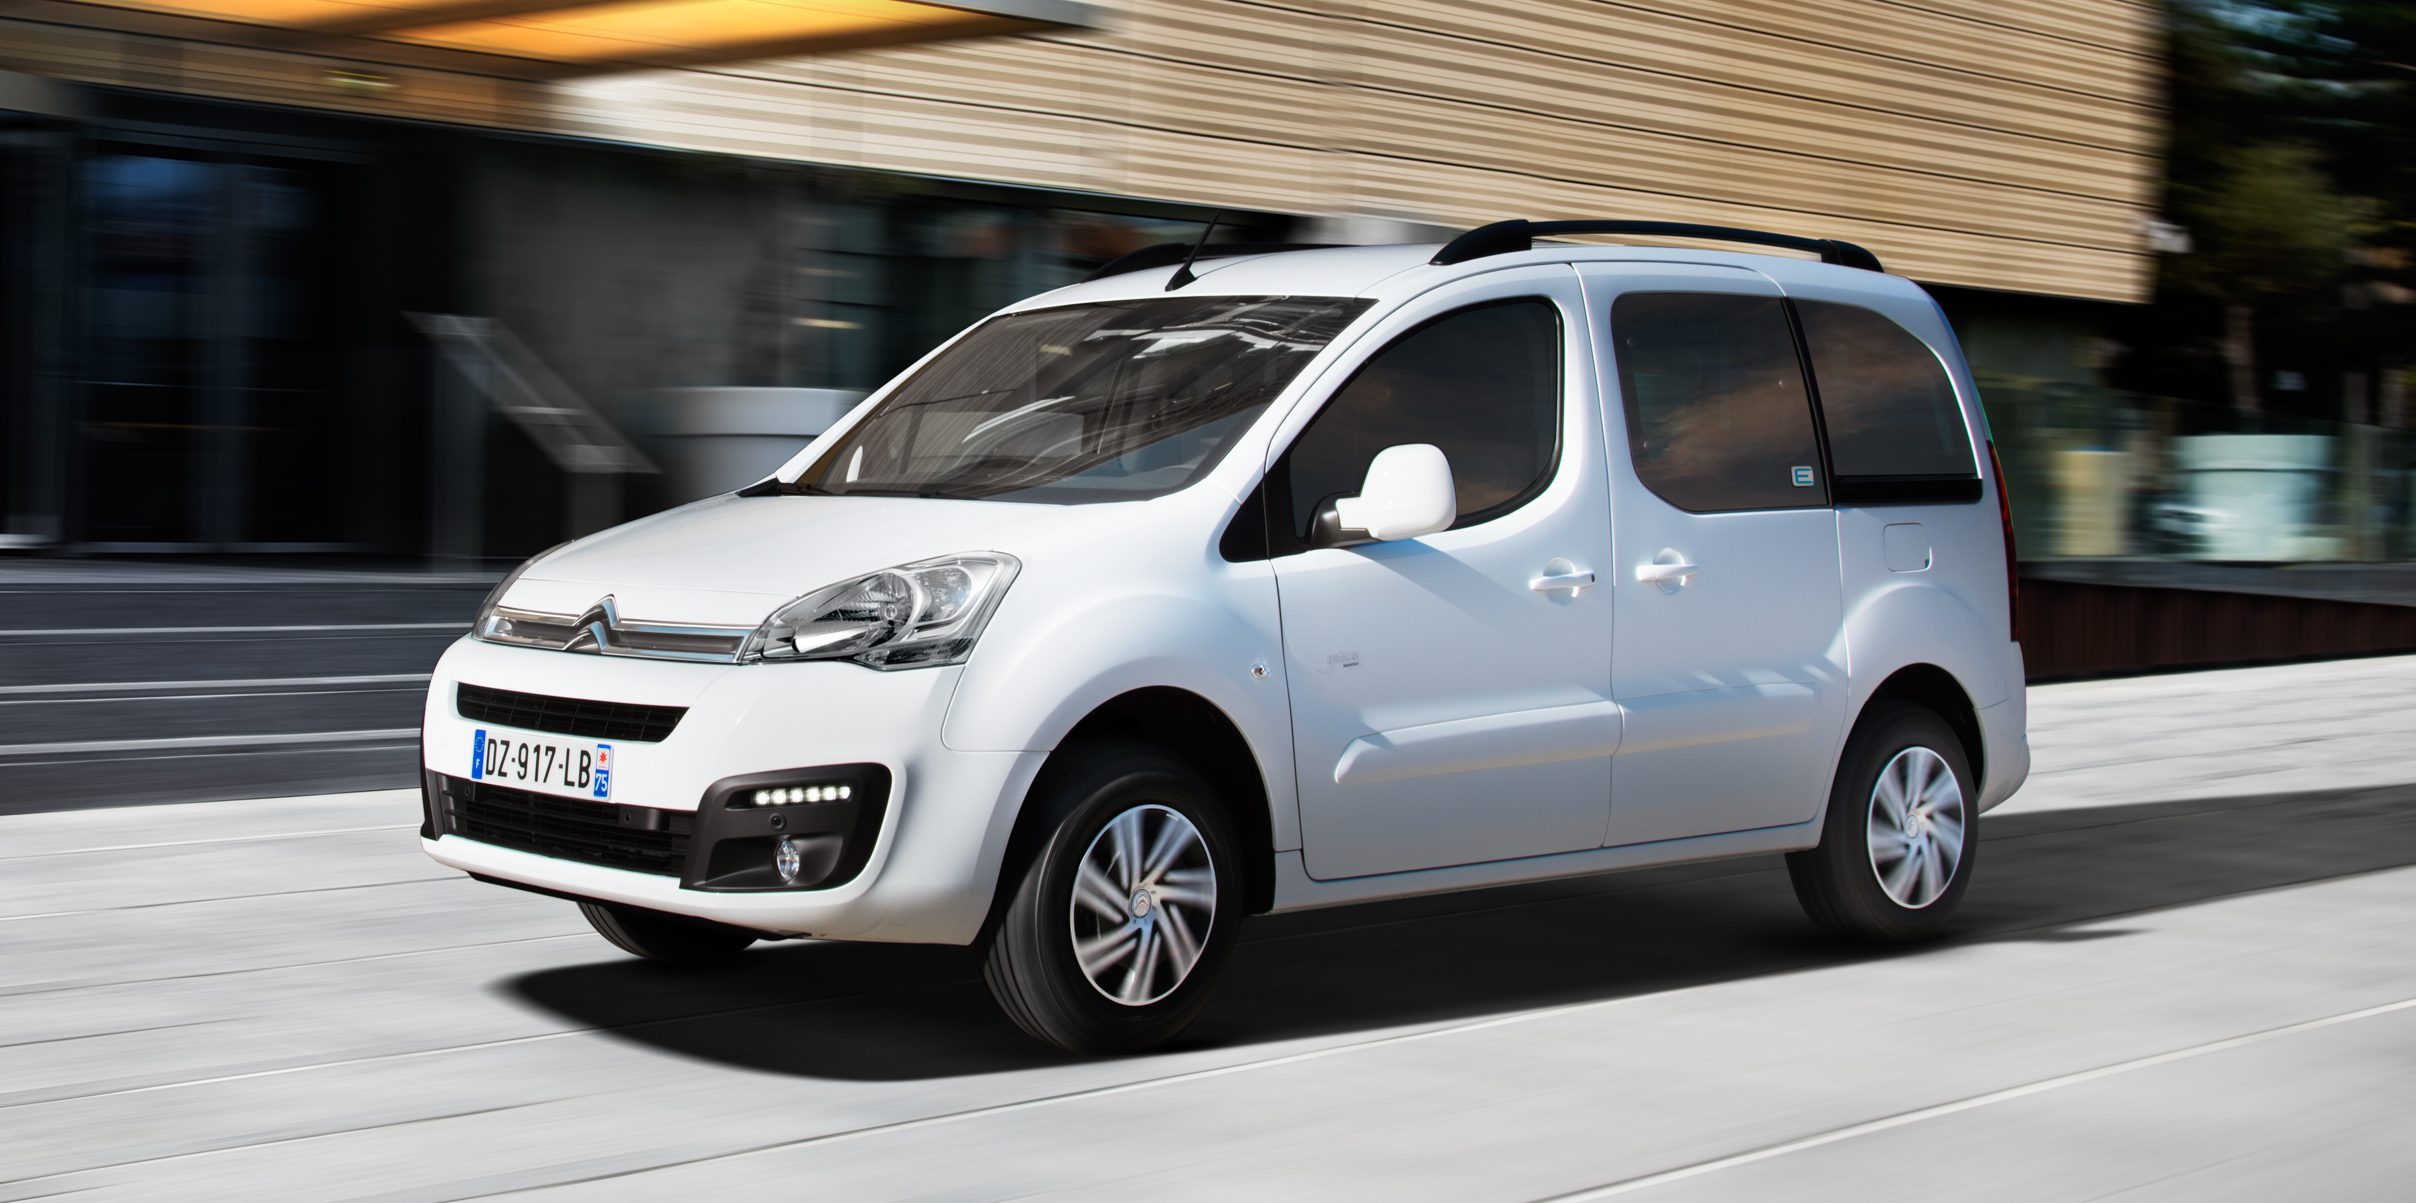 Citroën unveils an all-electric version of its Berlingo compact